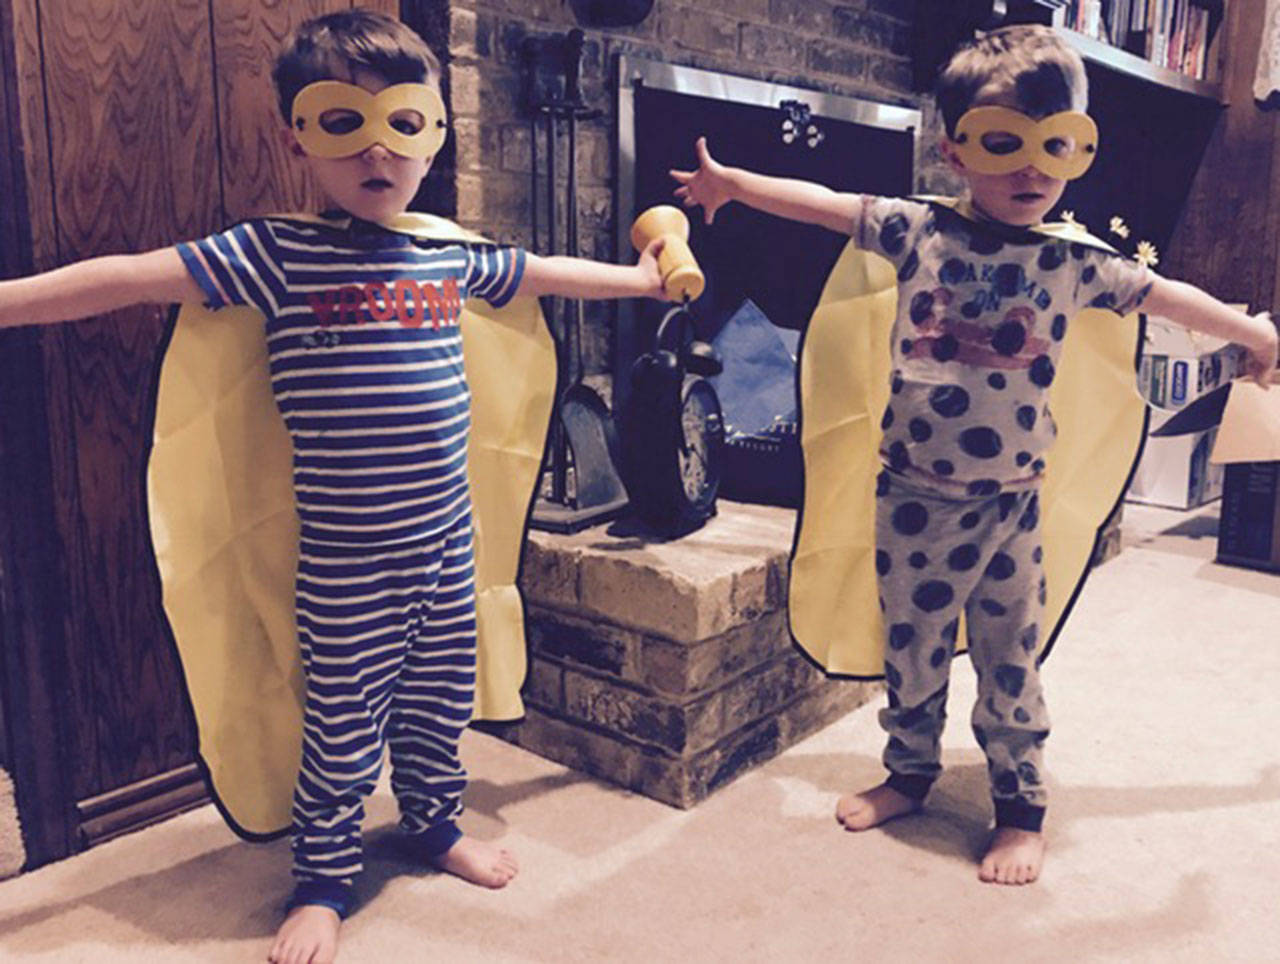 Natalie Drugan’s 4-year-old twin boys, pictured, were both victims of choking within four days of each other. Island superheroes saved their lives. Photo courtesy of Natalie Drugan